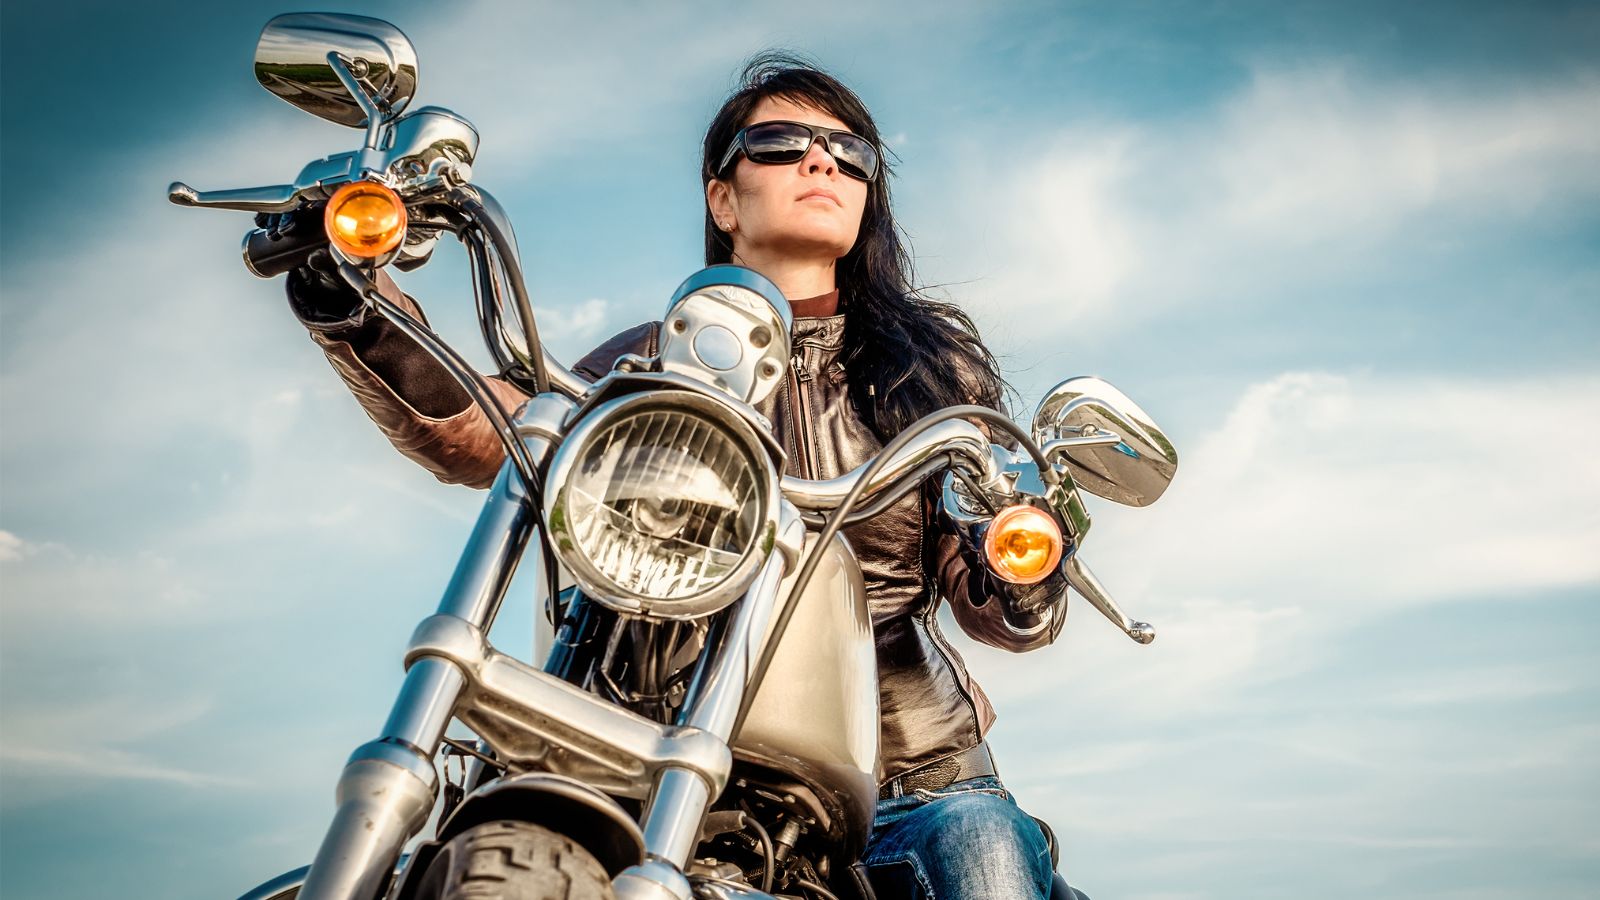 20 Empowering Motorcycle Quotes for Women Riders